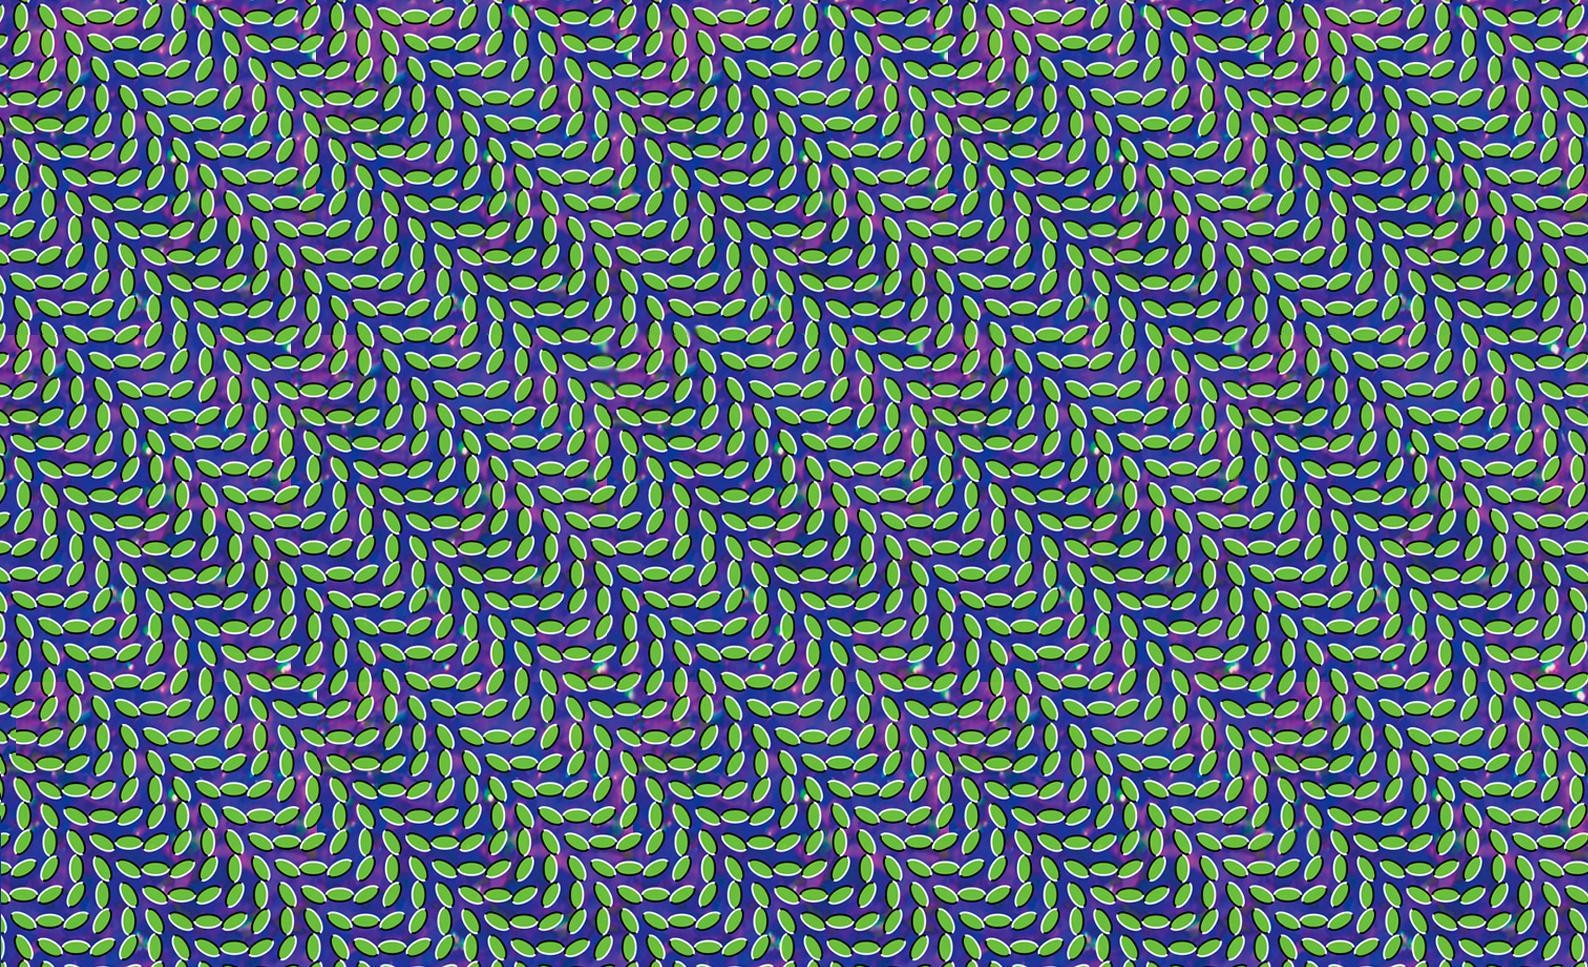 General 1588x967 optical illusion pattern abstract leaves Merriweather Post Pavilion green digital art